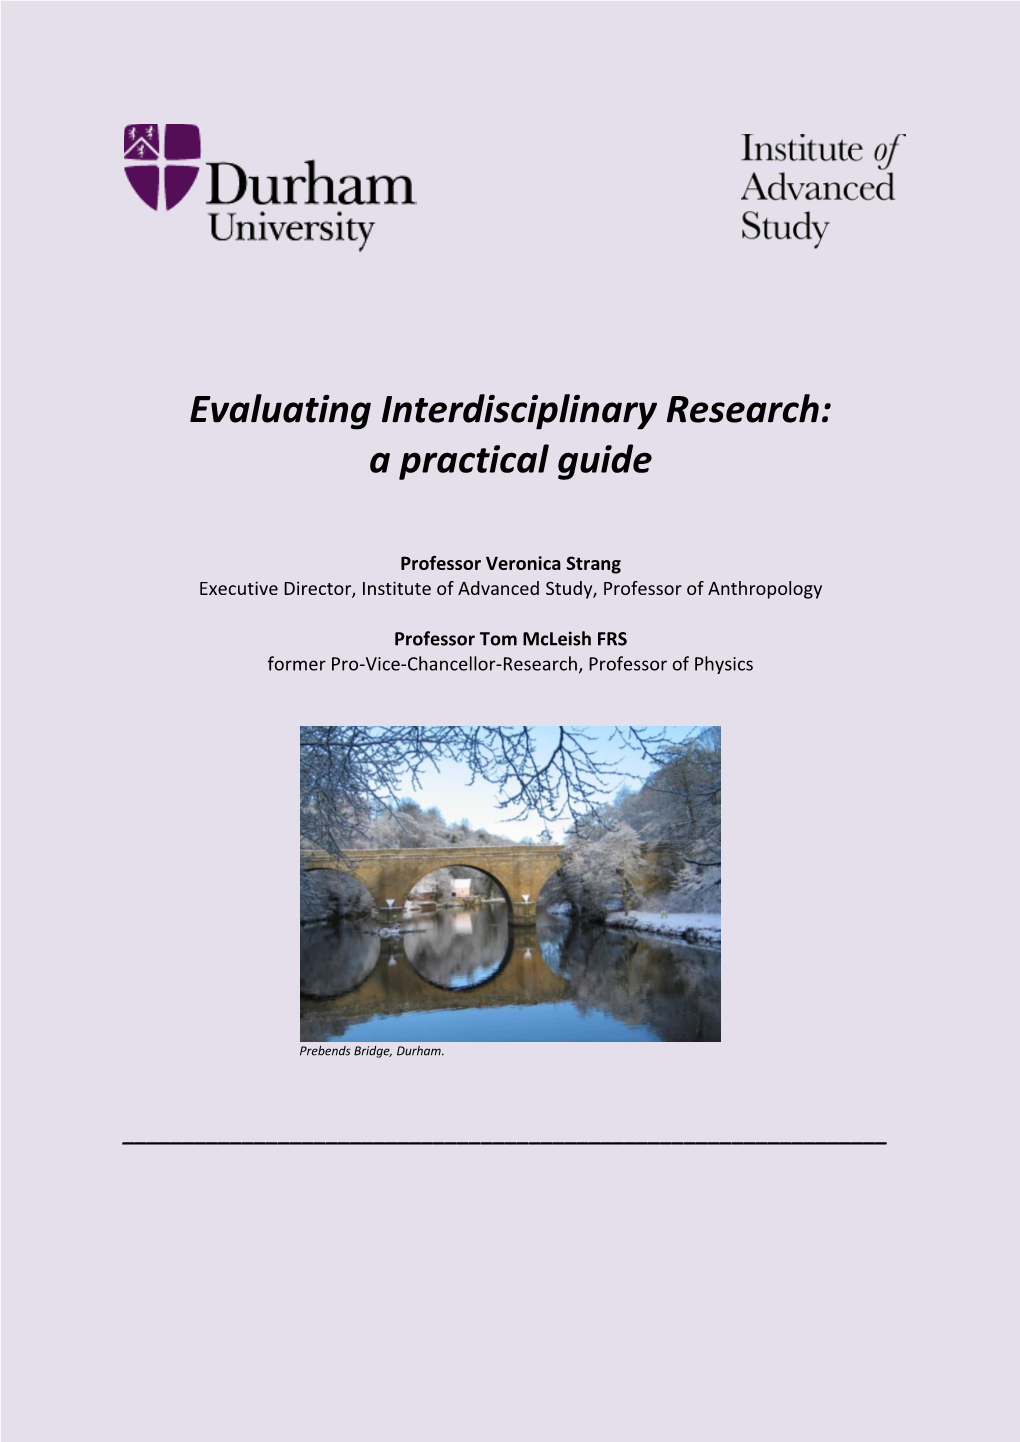 Evaluating Interdisciplinary Research: a Practical Guide